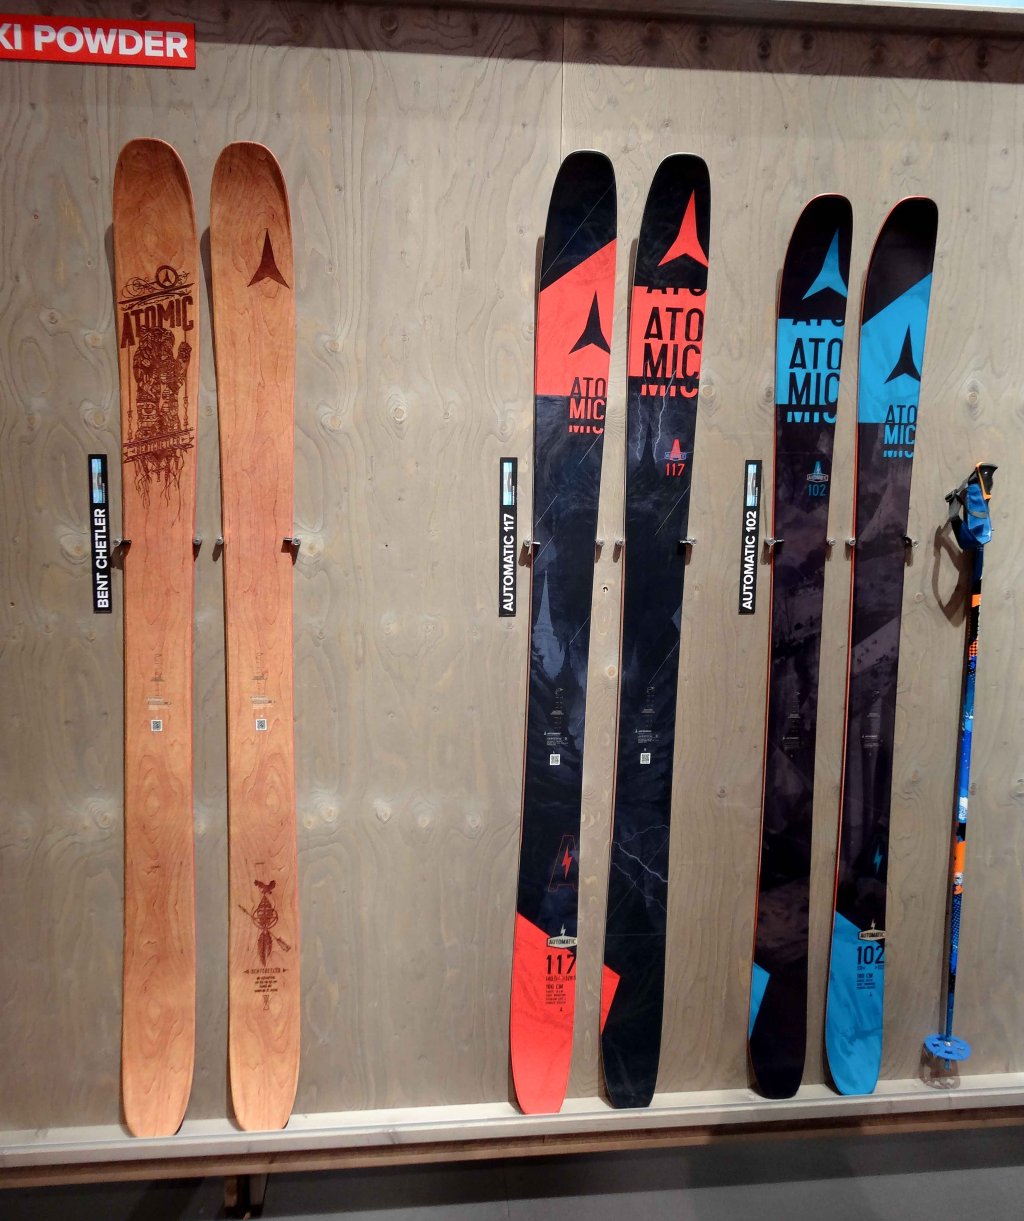 Atomic has also thinned out its pure freeride ski range